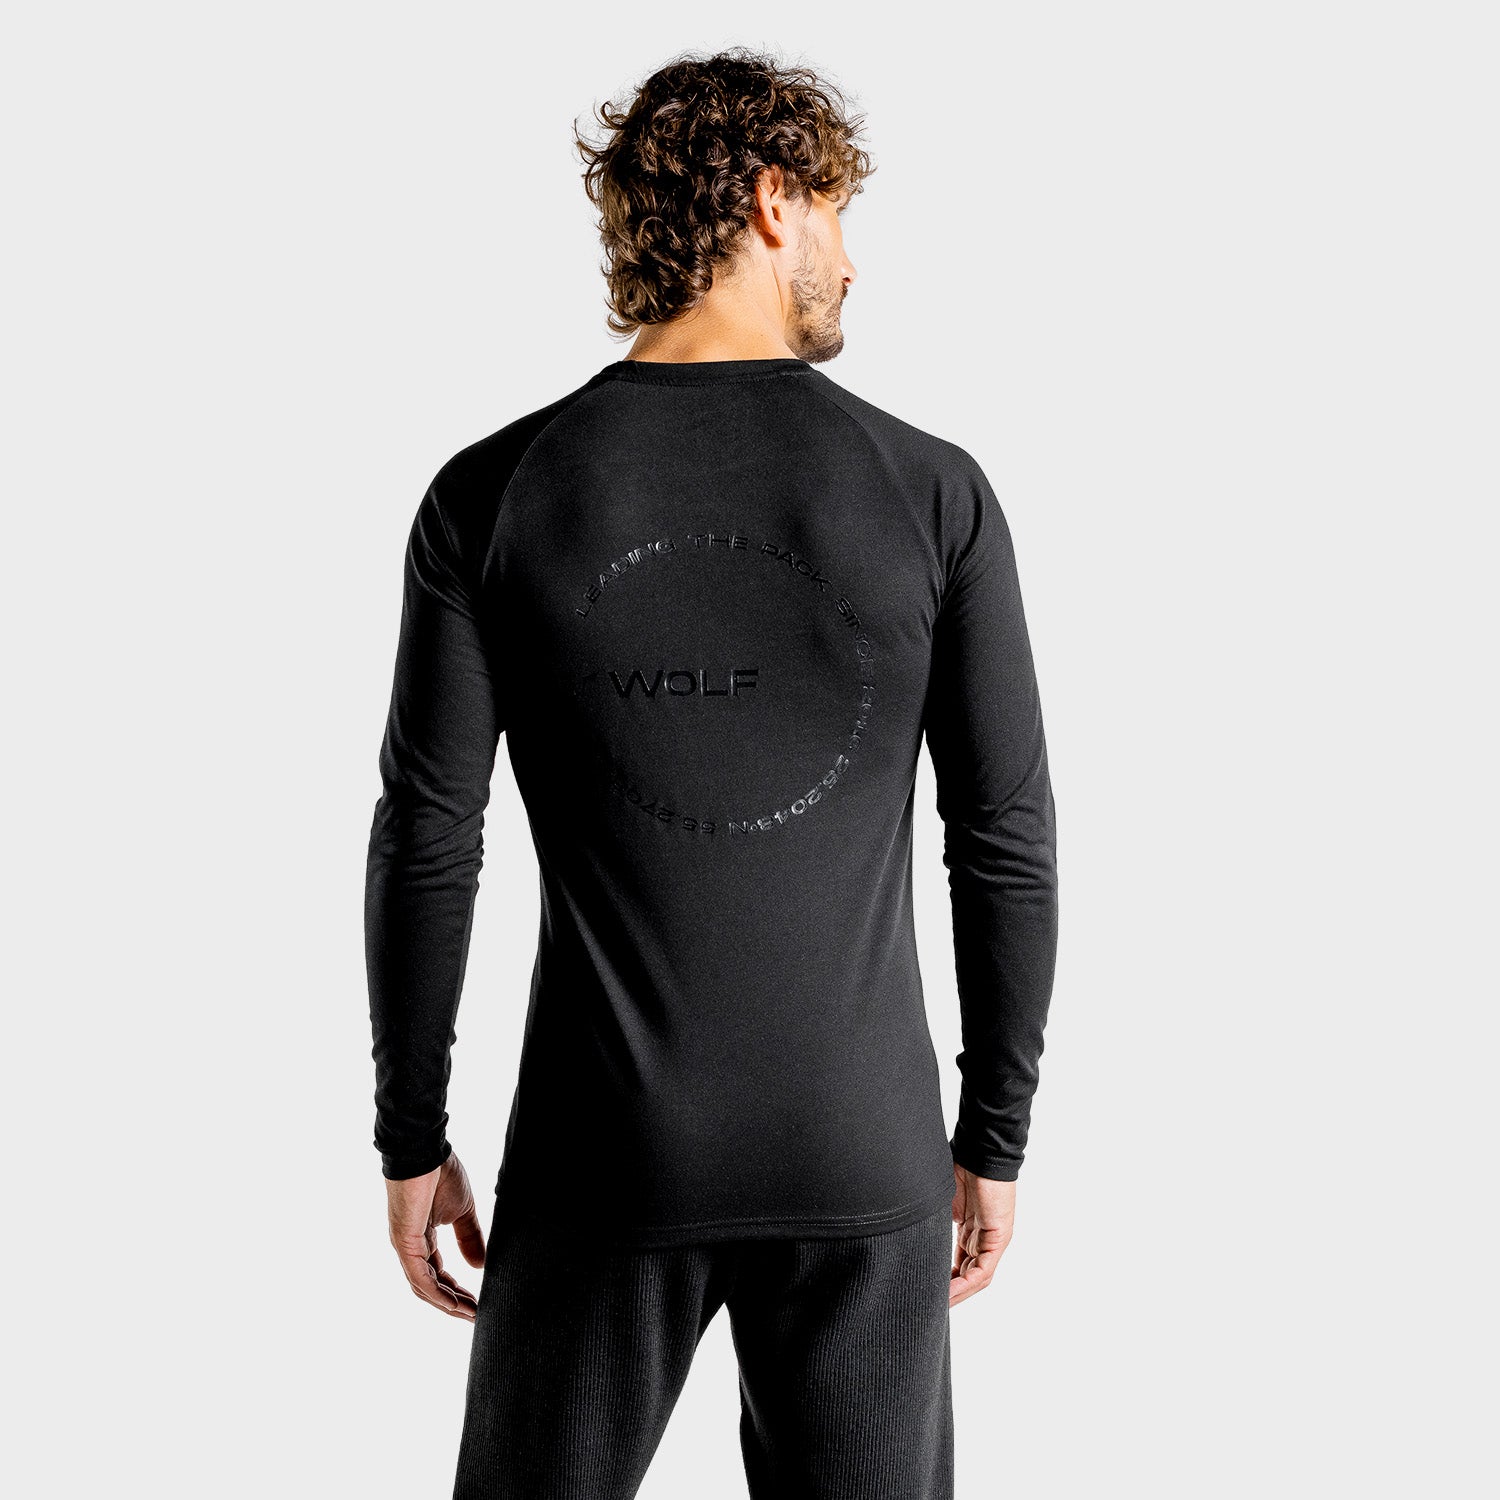 squatwolf-workout-shirts-for-men-luxe-long-sleeves-tee-black-gym-wear